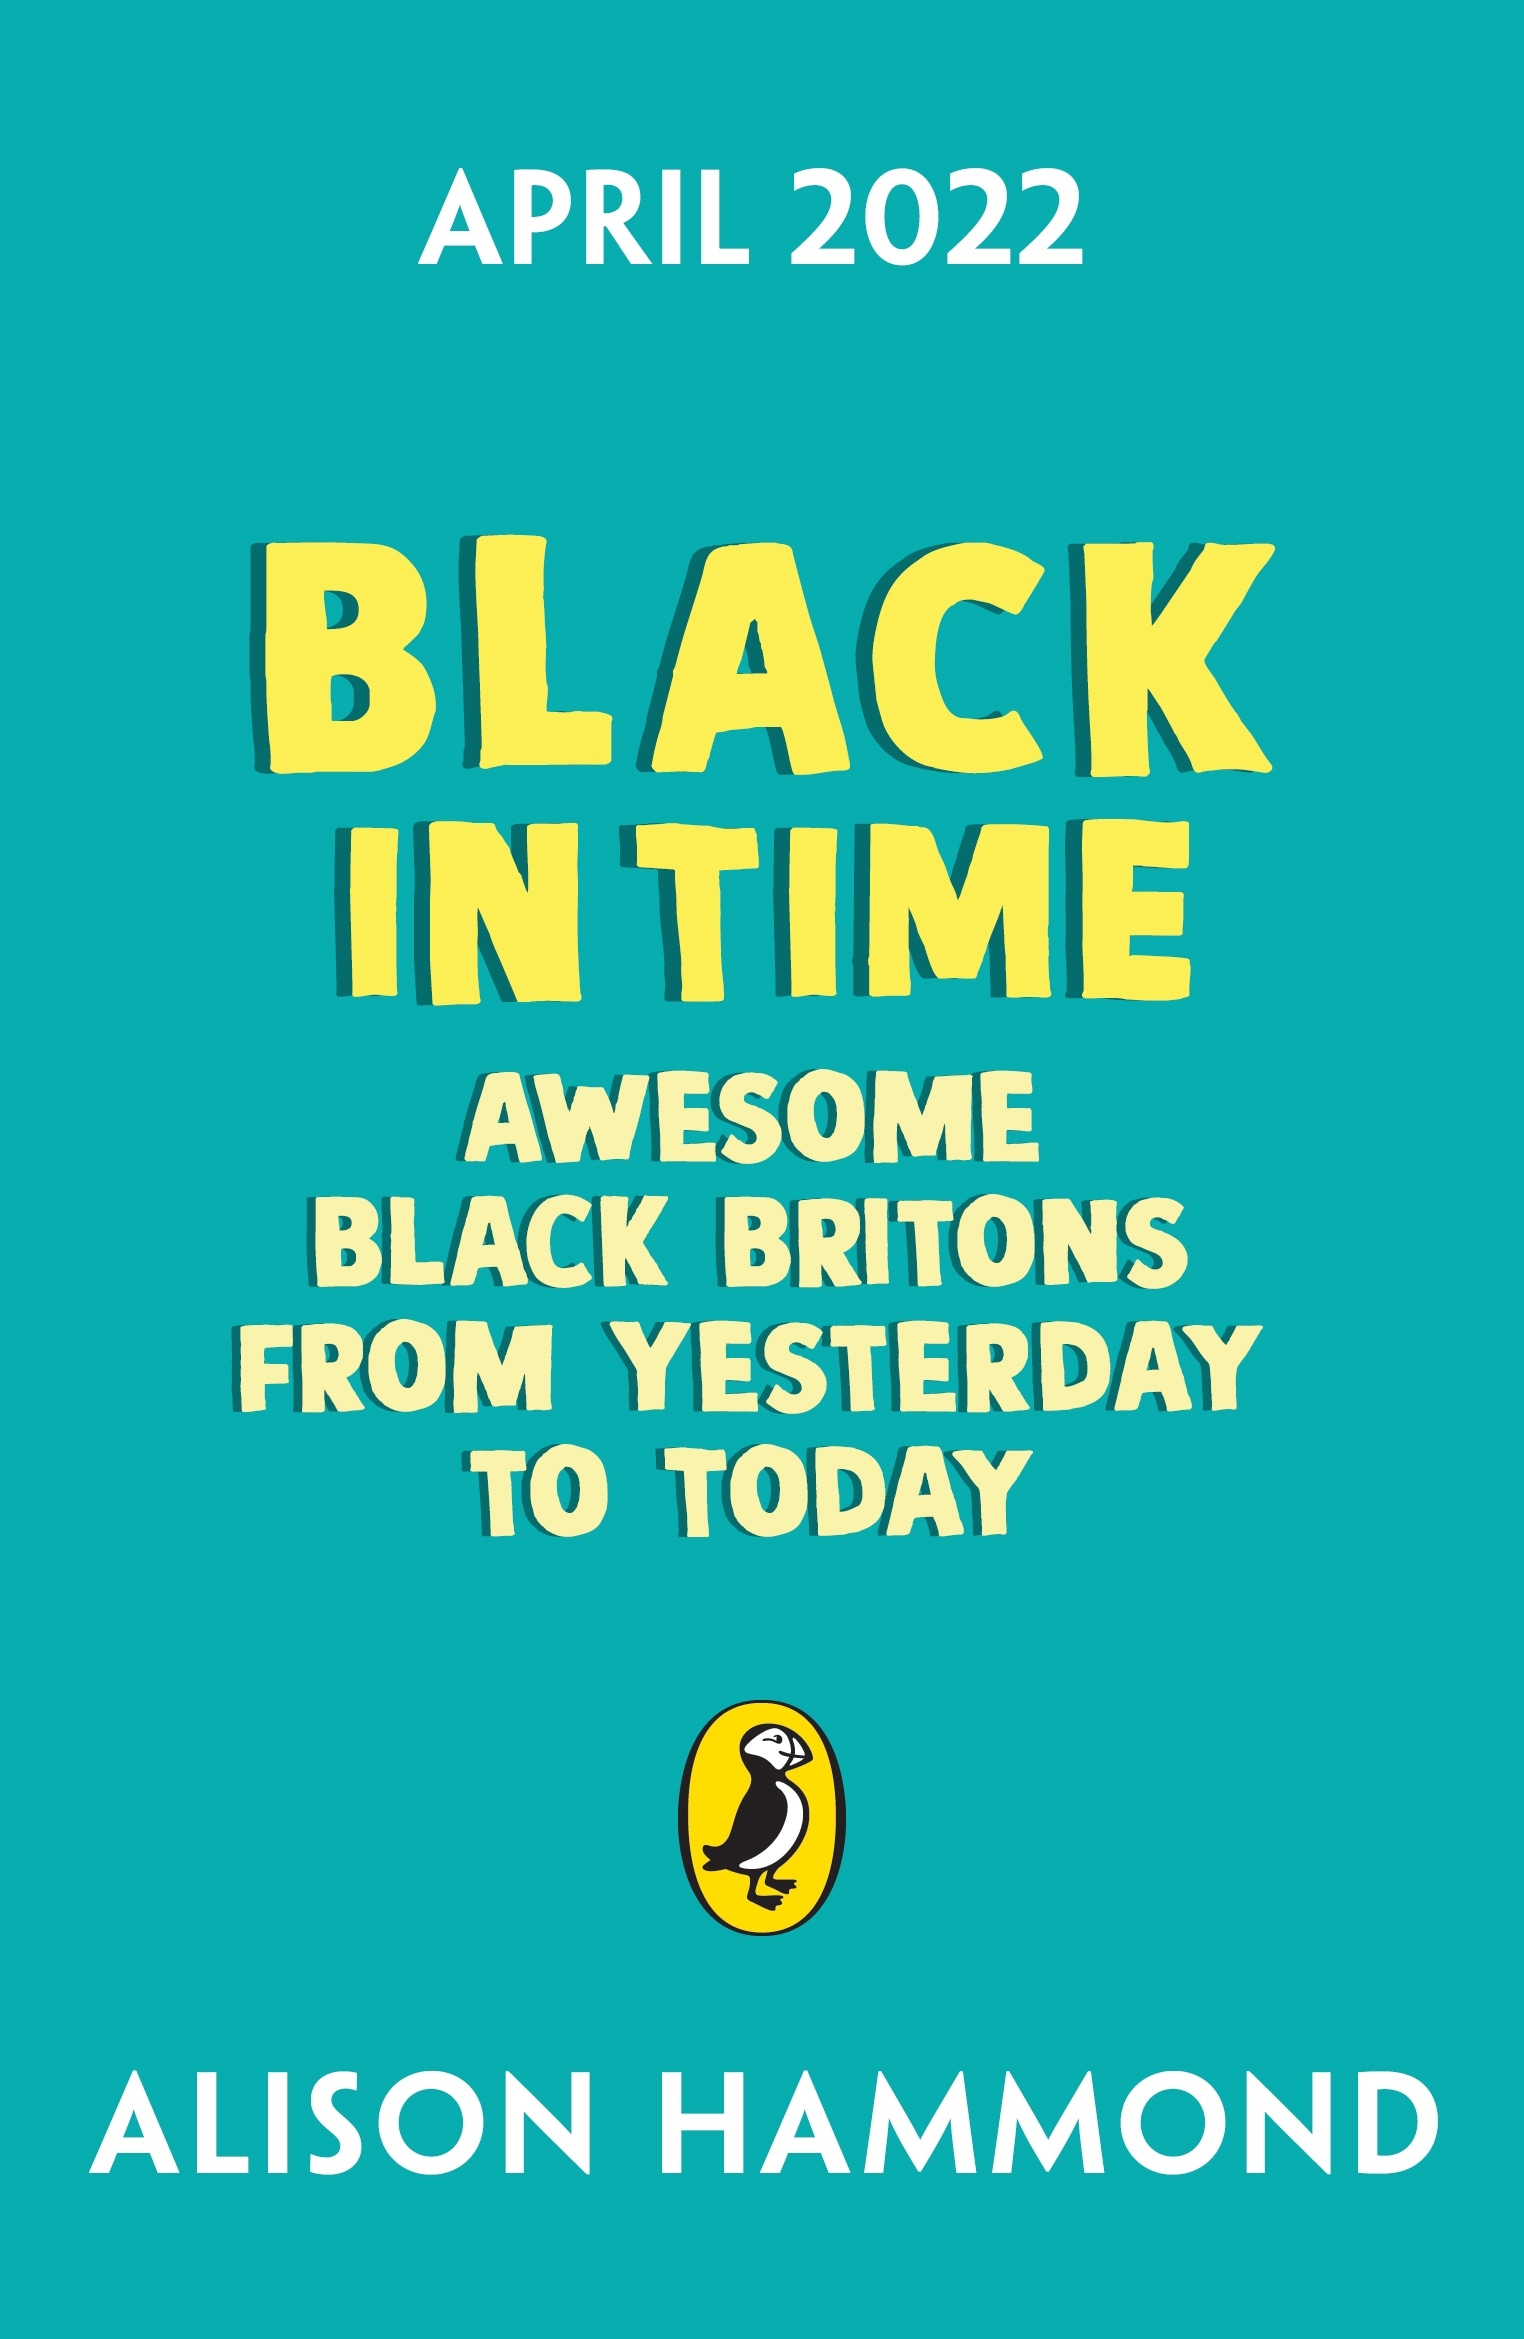 Book “Black in Time” by Alison Hammond — April 14, 2022